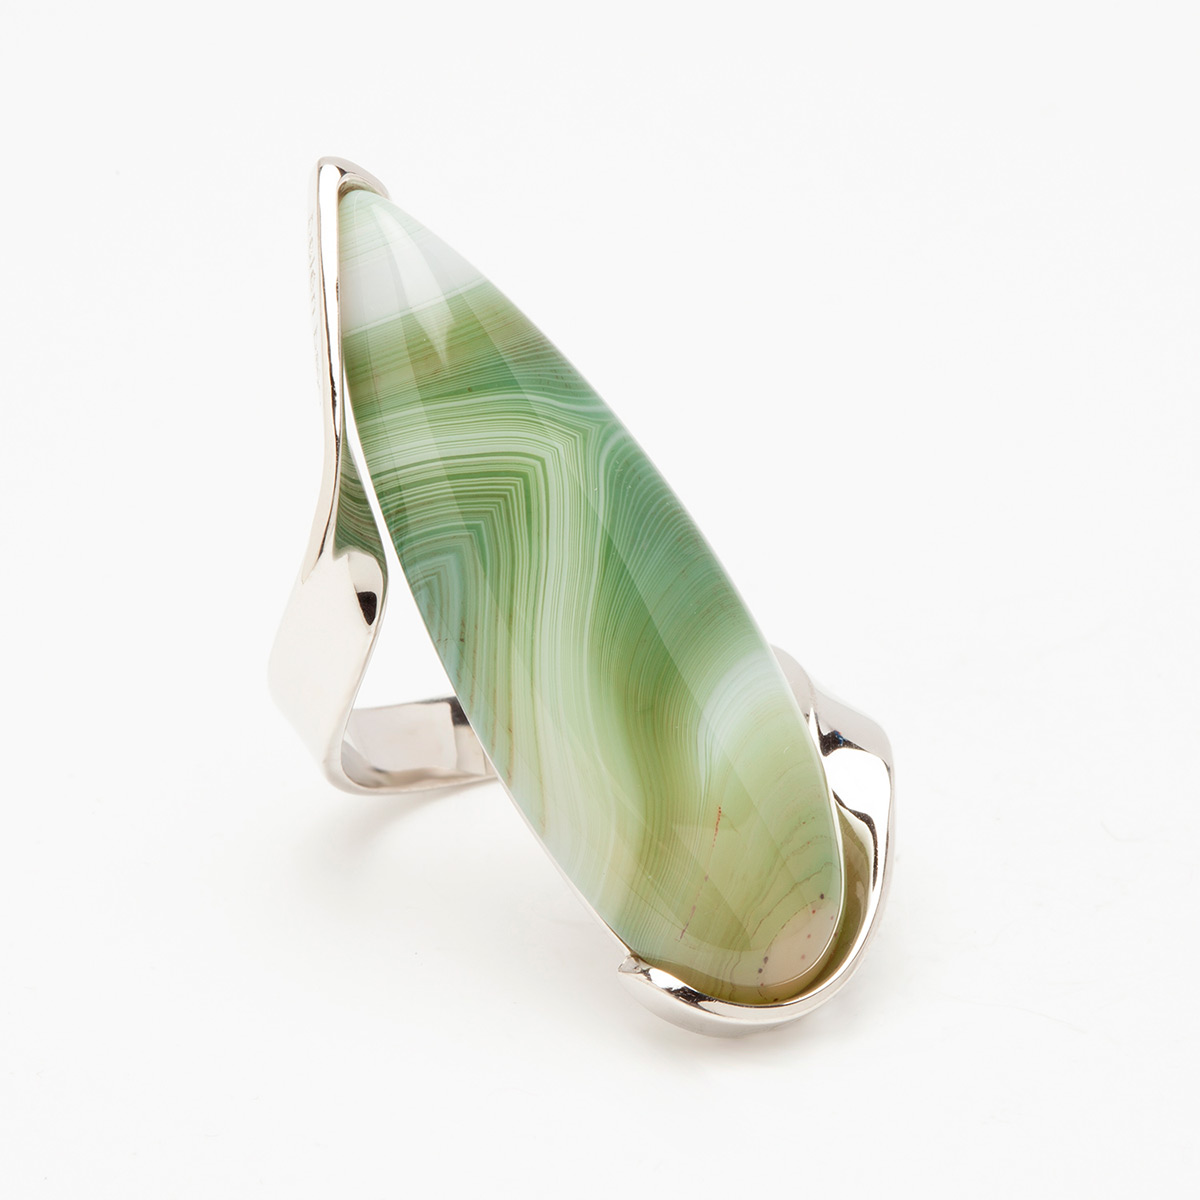 Tae handmade sterling silver and green banded agate ring 2 designed by Belen Bajo